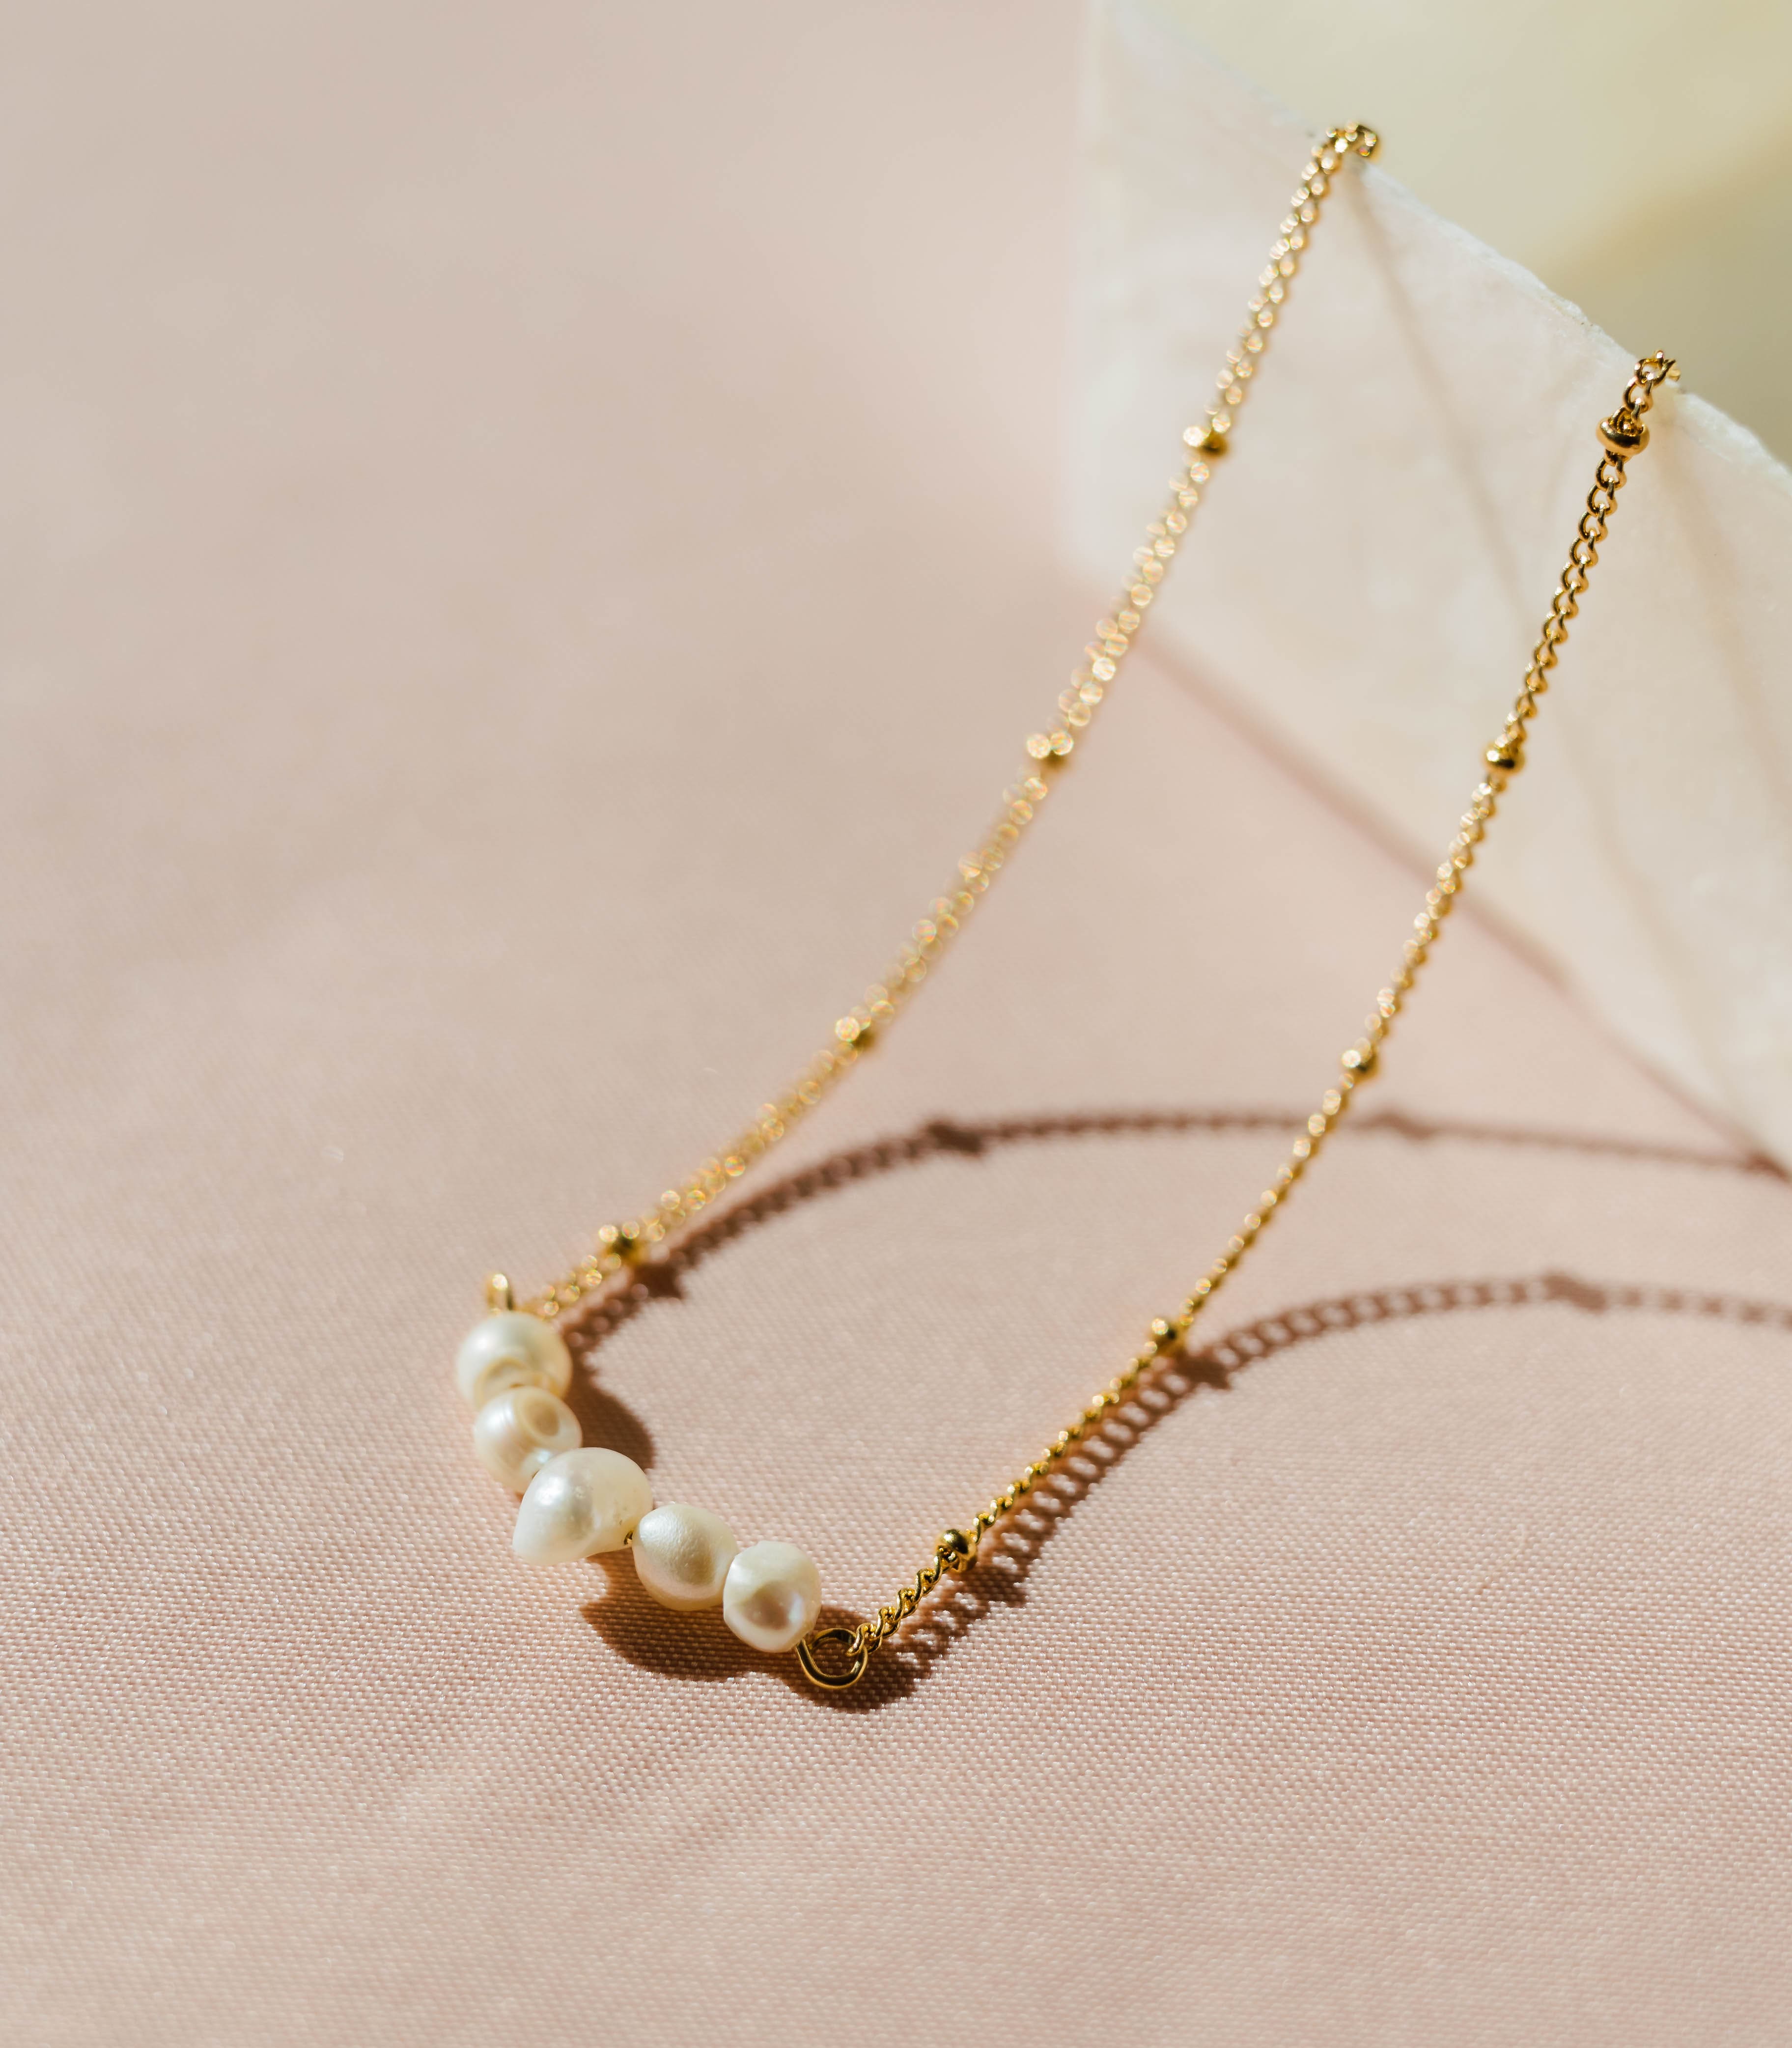 REAL PEARL BRACELET and NECKLACE | Shopee Philippines